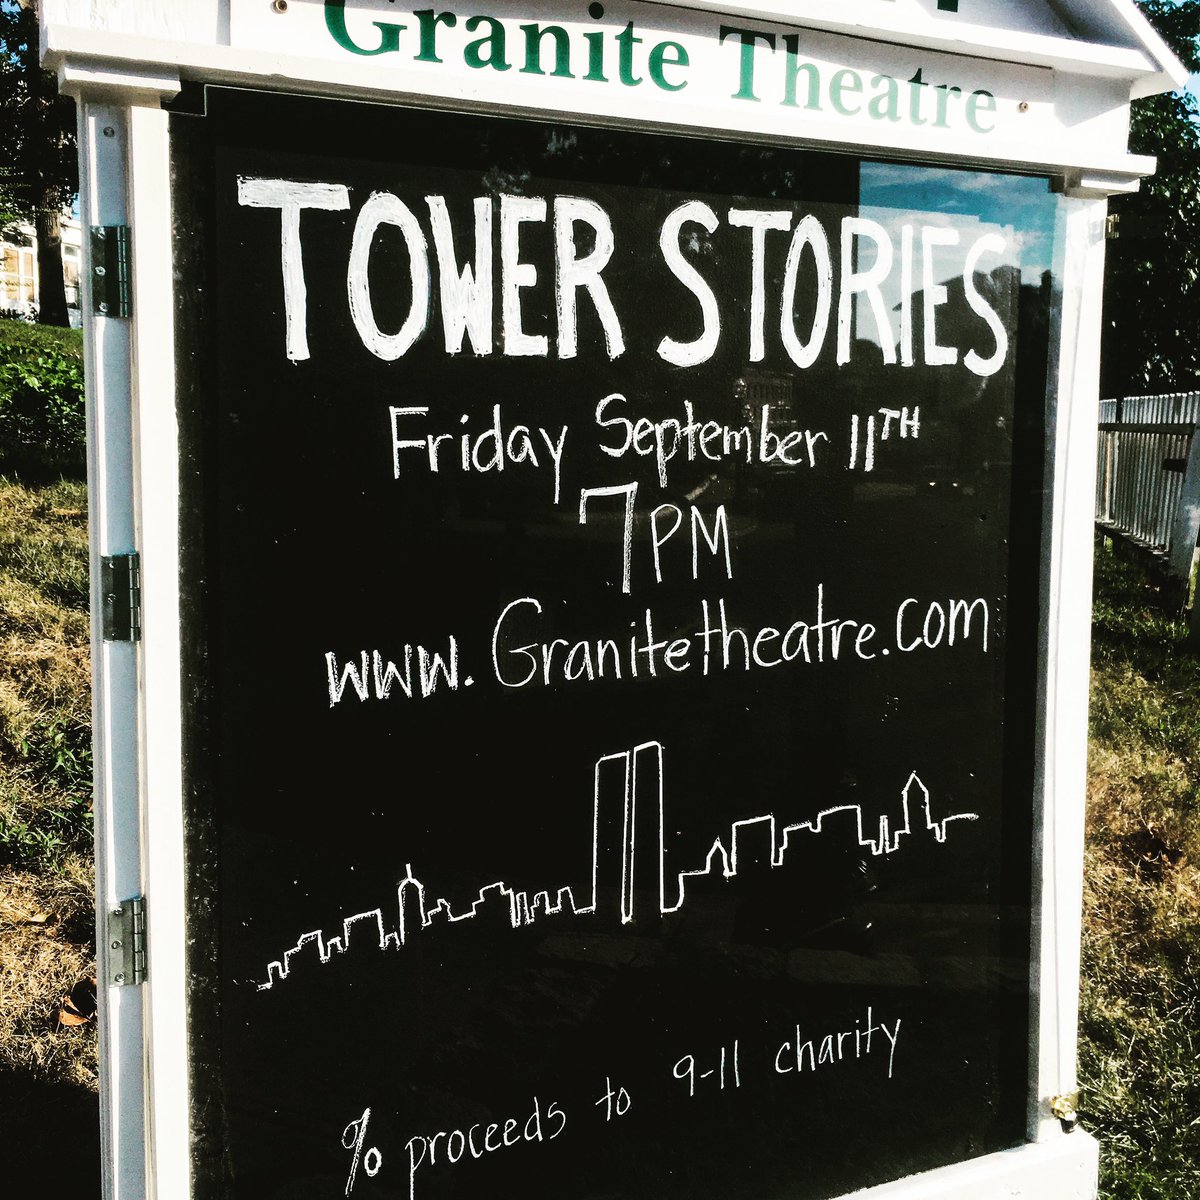 Big news coming this Friday! Our third online/pandemic production is just around the corner! #granitetheatre #westerlytheatre #rhodeislandtheatre #towerstories #firstreaponders #supportlocaltheatre #september11